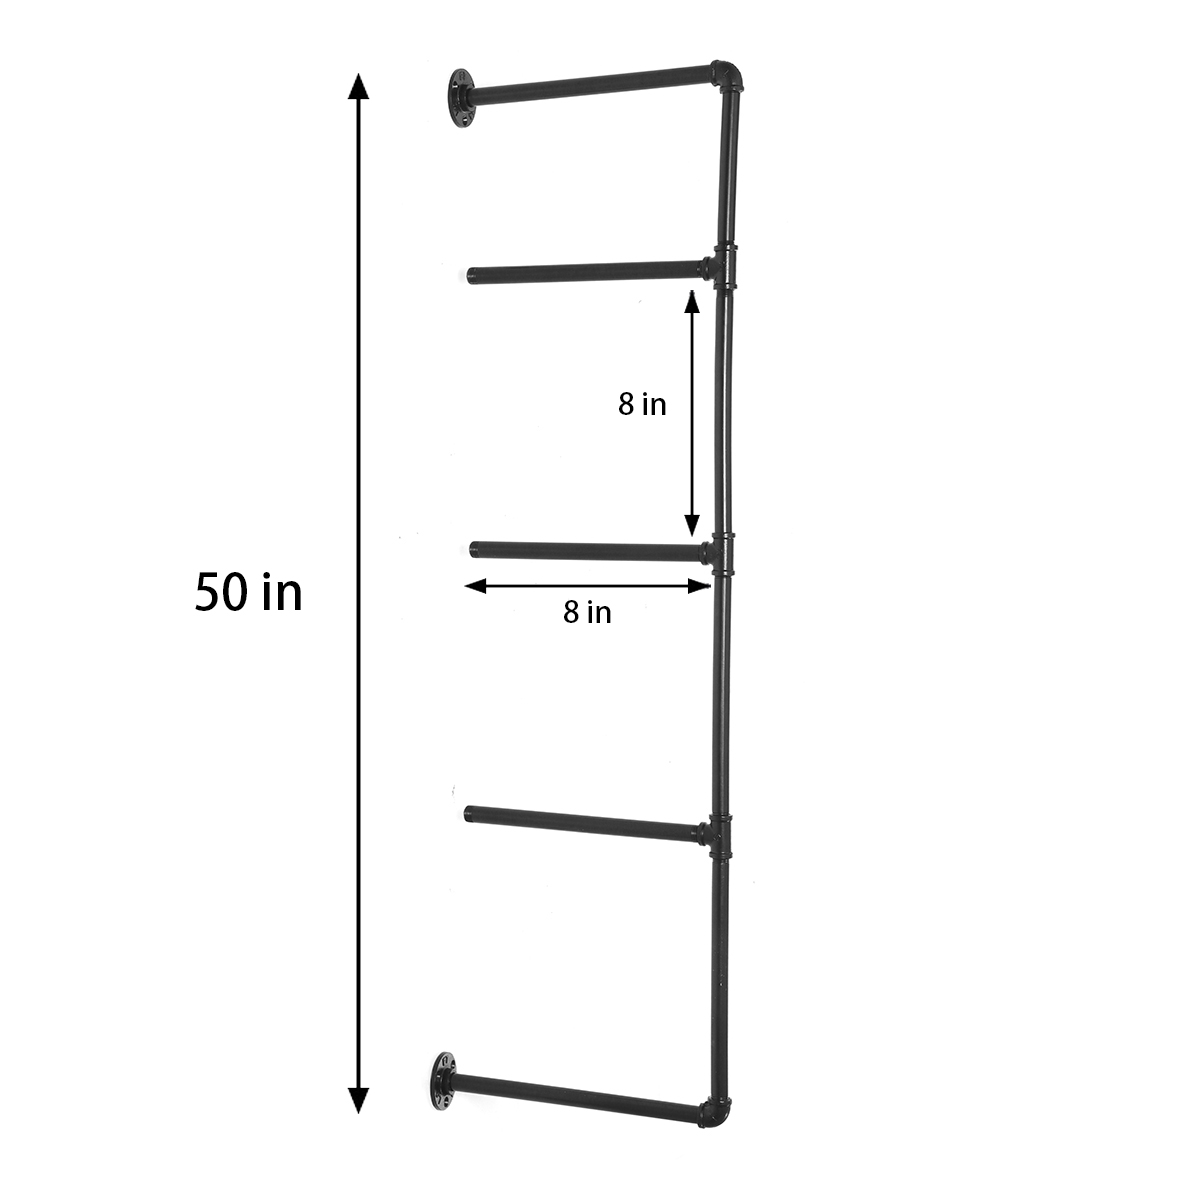 2Pcs 4/5-Tier Industrial Iron Pipe Shelf Brackets Wall-Mounted Bookshelf Frame, Customizable DIY Shelving, Floating Open Display Storage for Home, Office, Commercial Use - image 3 of 7